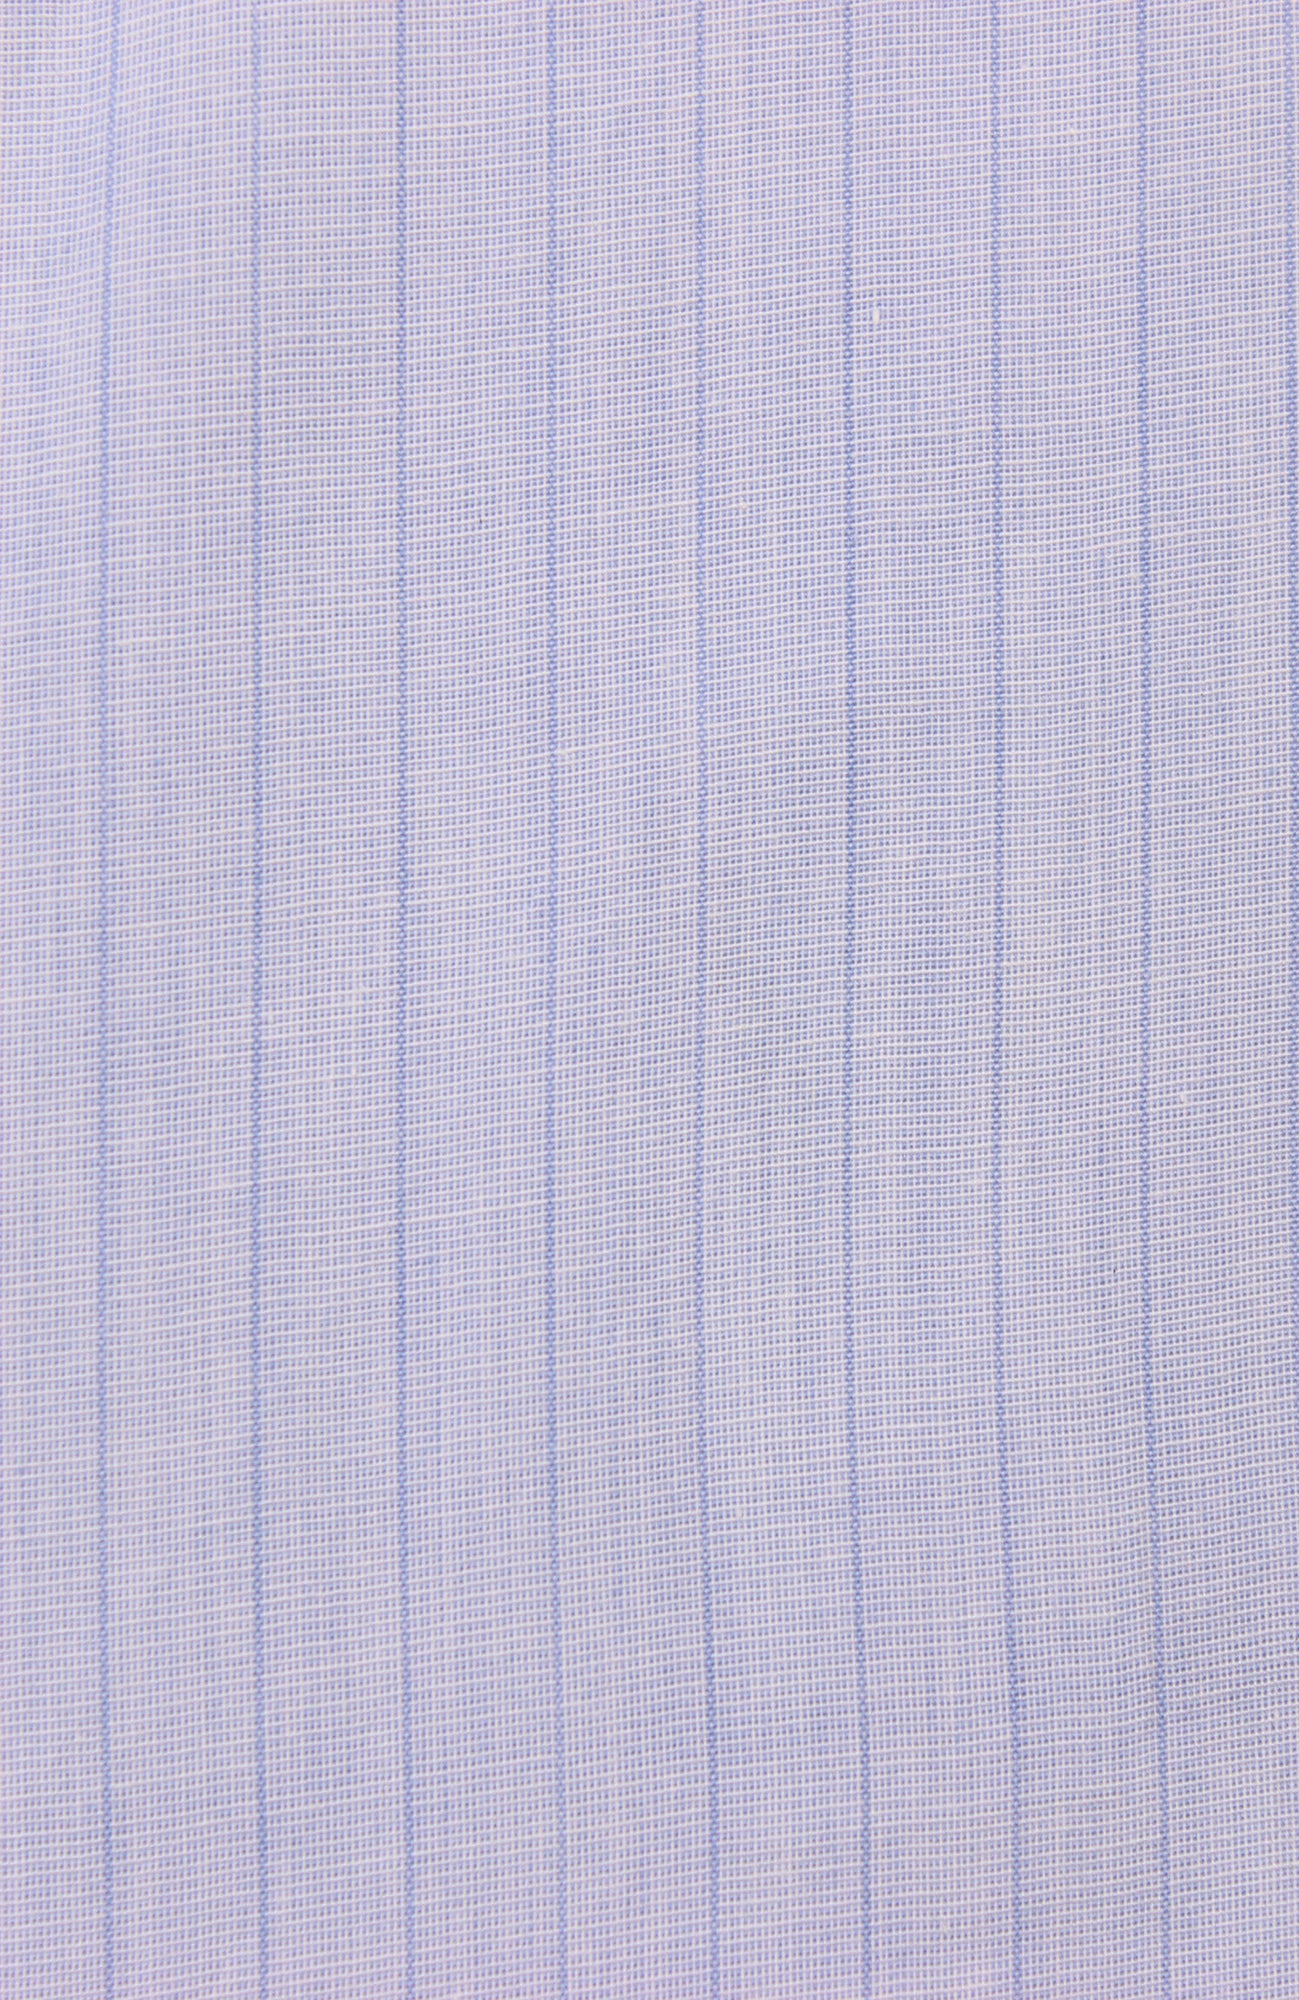 Rib Knit Fabric: The Different Types and What They Are Used For